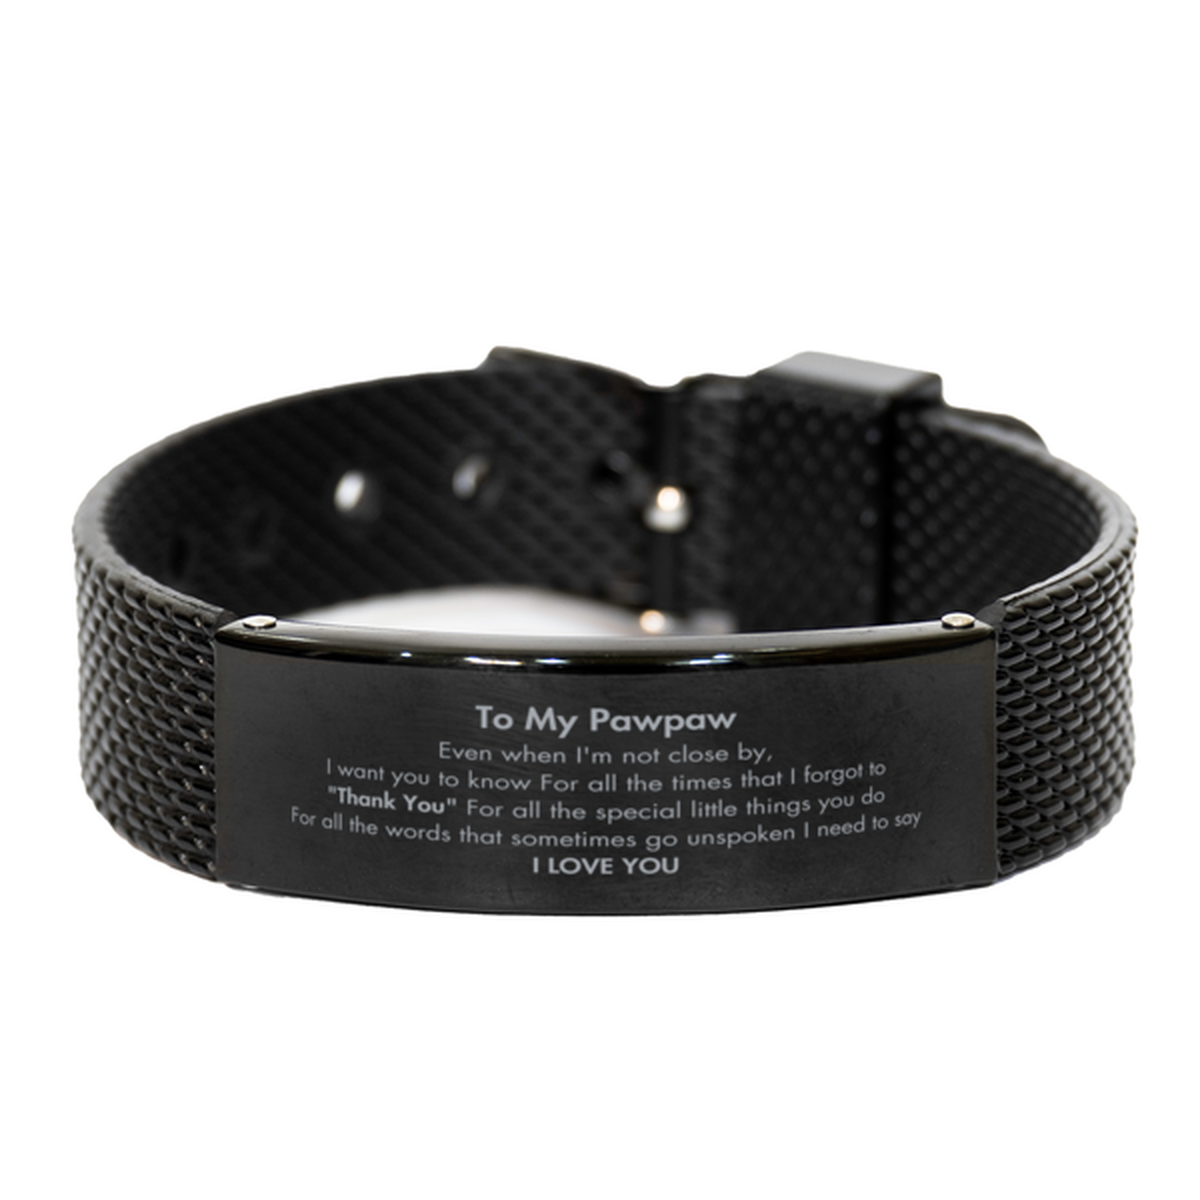 Thank You Gifts for Pawpaw, Keepsake Black Shark Mesh Bracelet Gifts for Pawpaw Birthday Mother's day Father's Day Pawpaw For all the words That sometimes go unspoken I need to say I LOVE YOU